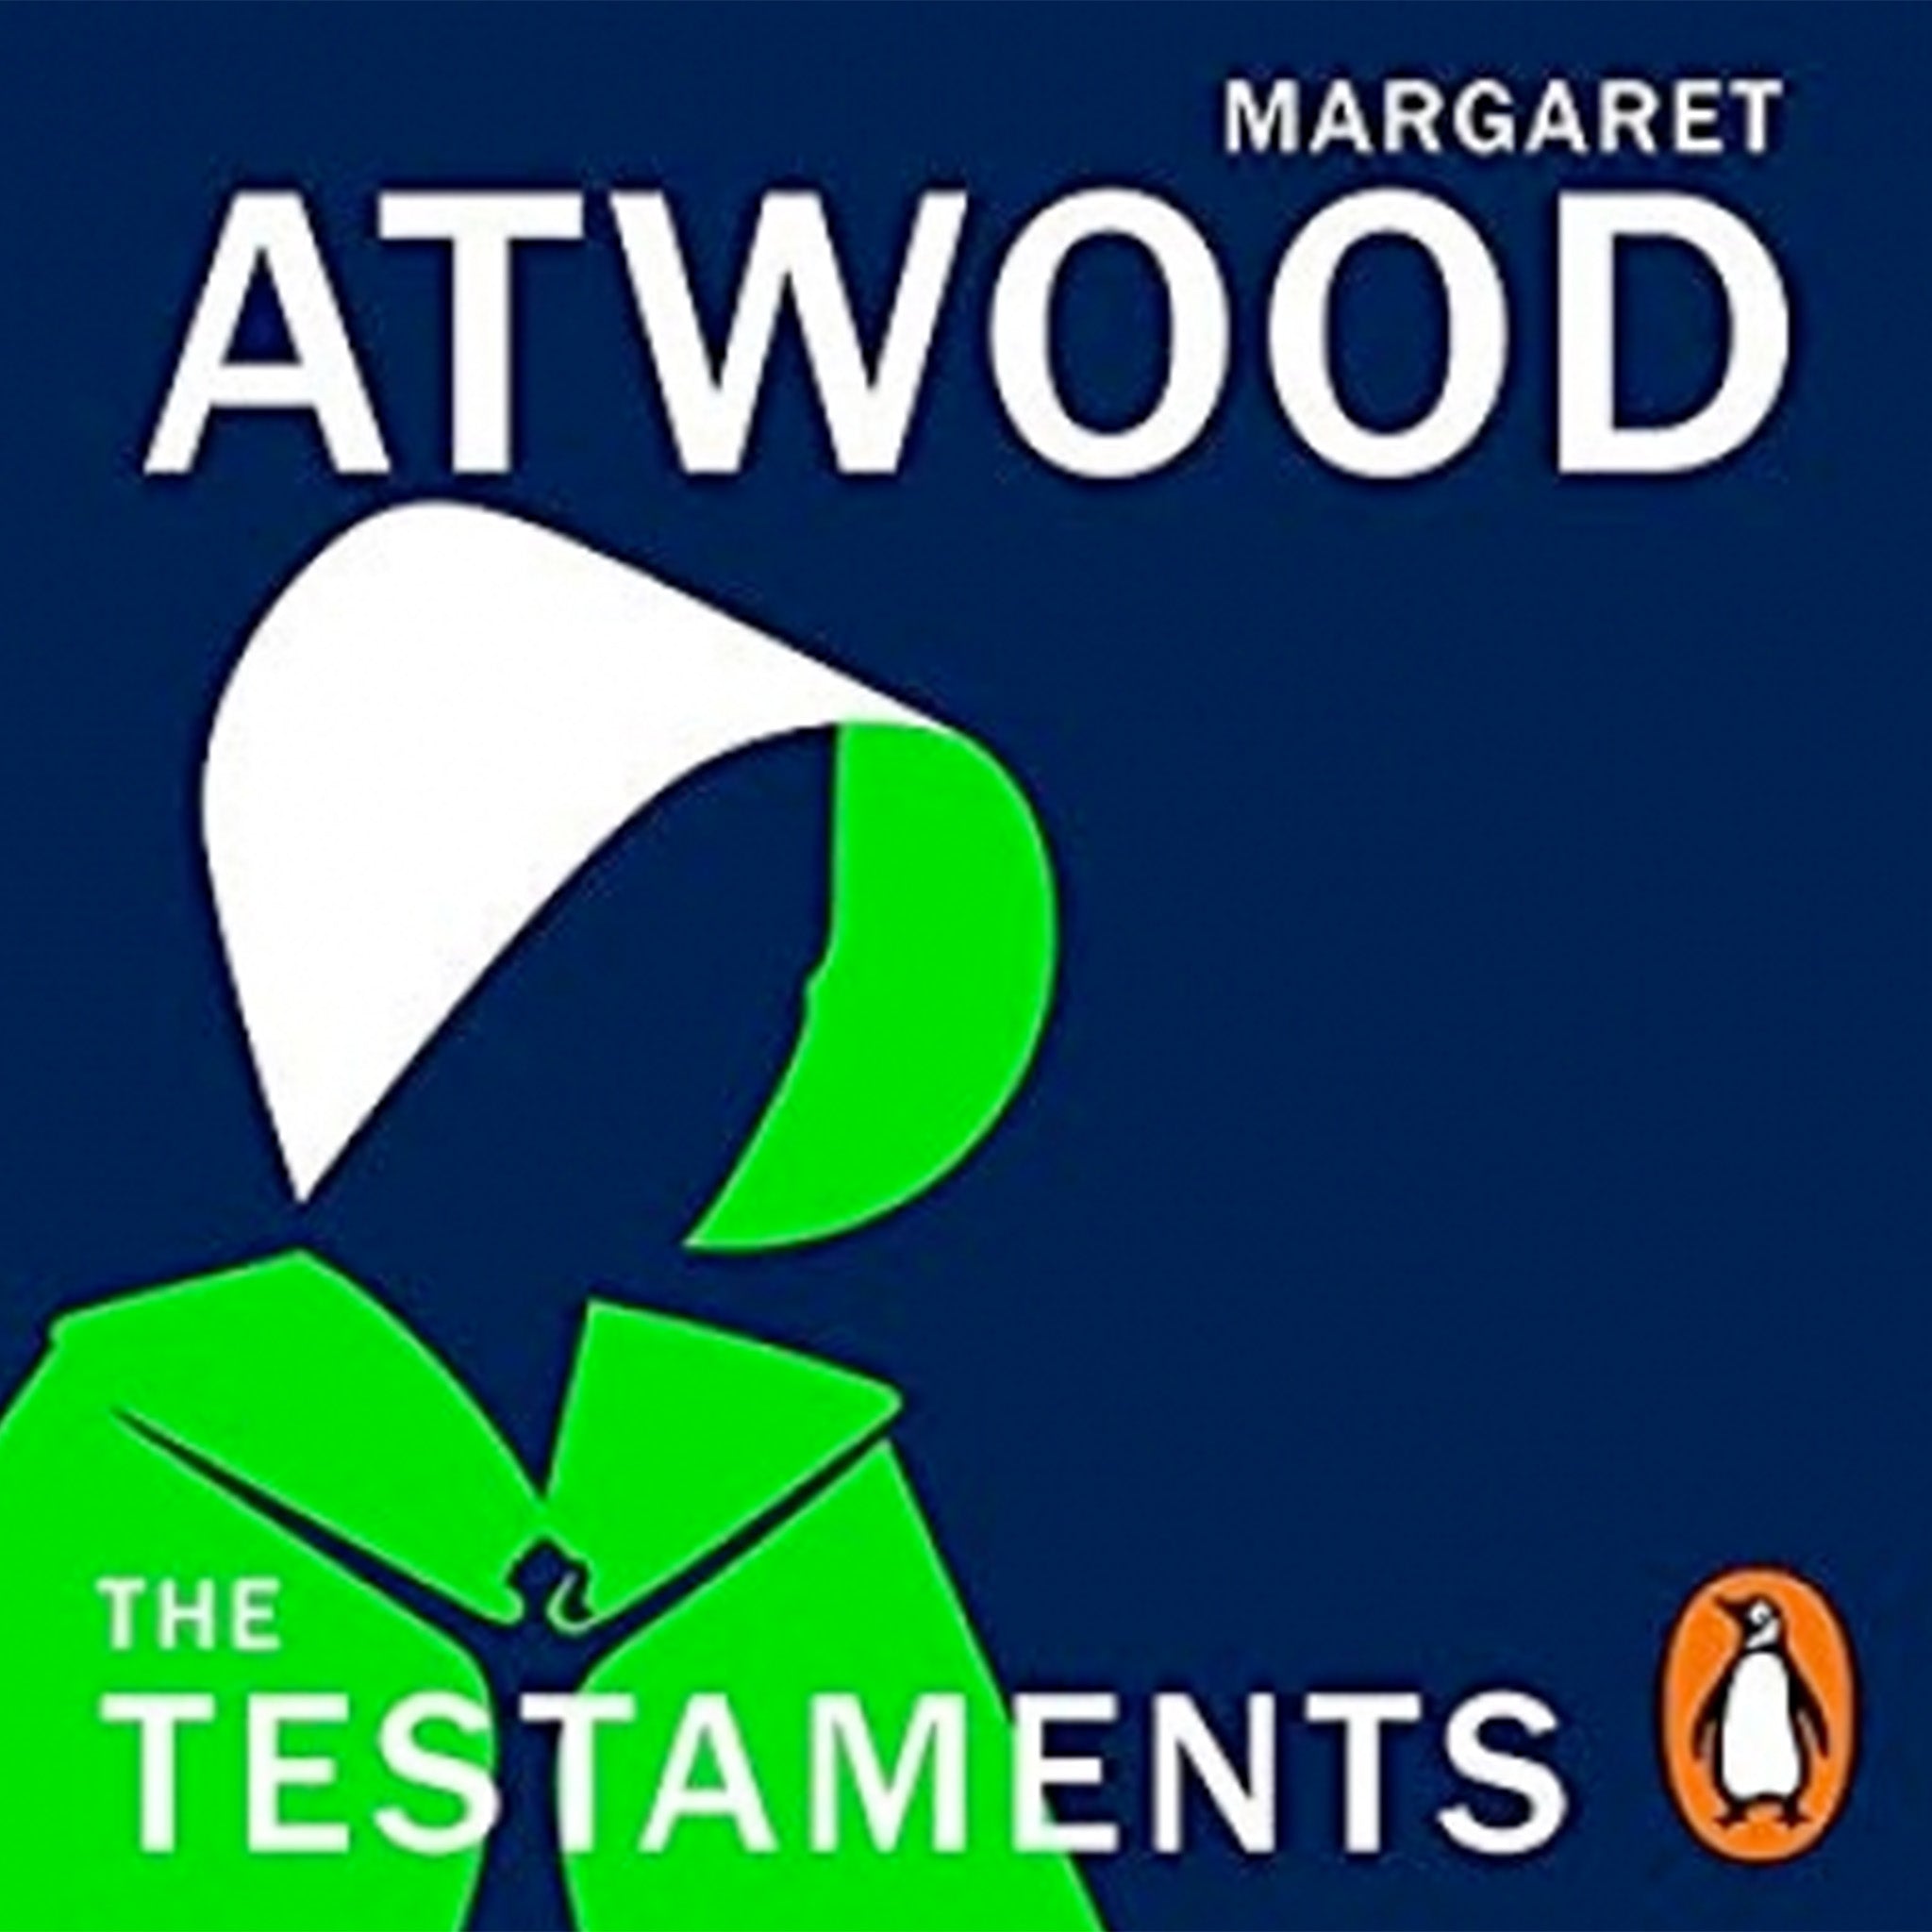 A Review | The Testaments By Margaret Atwood